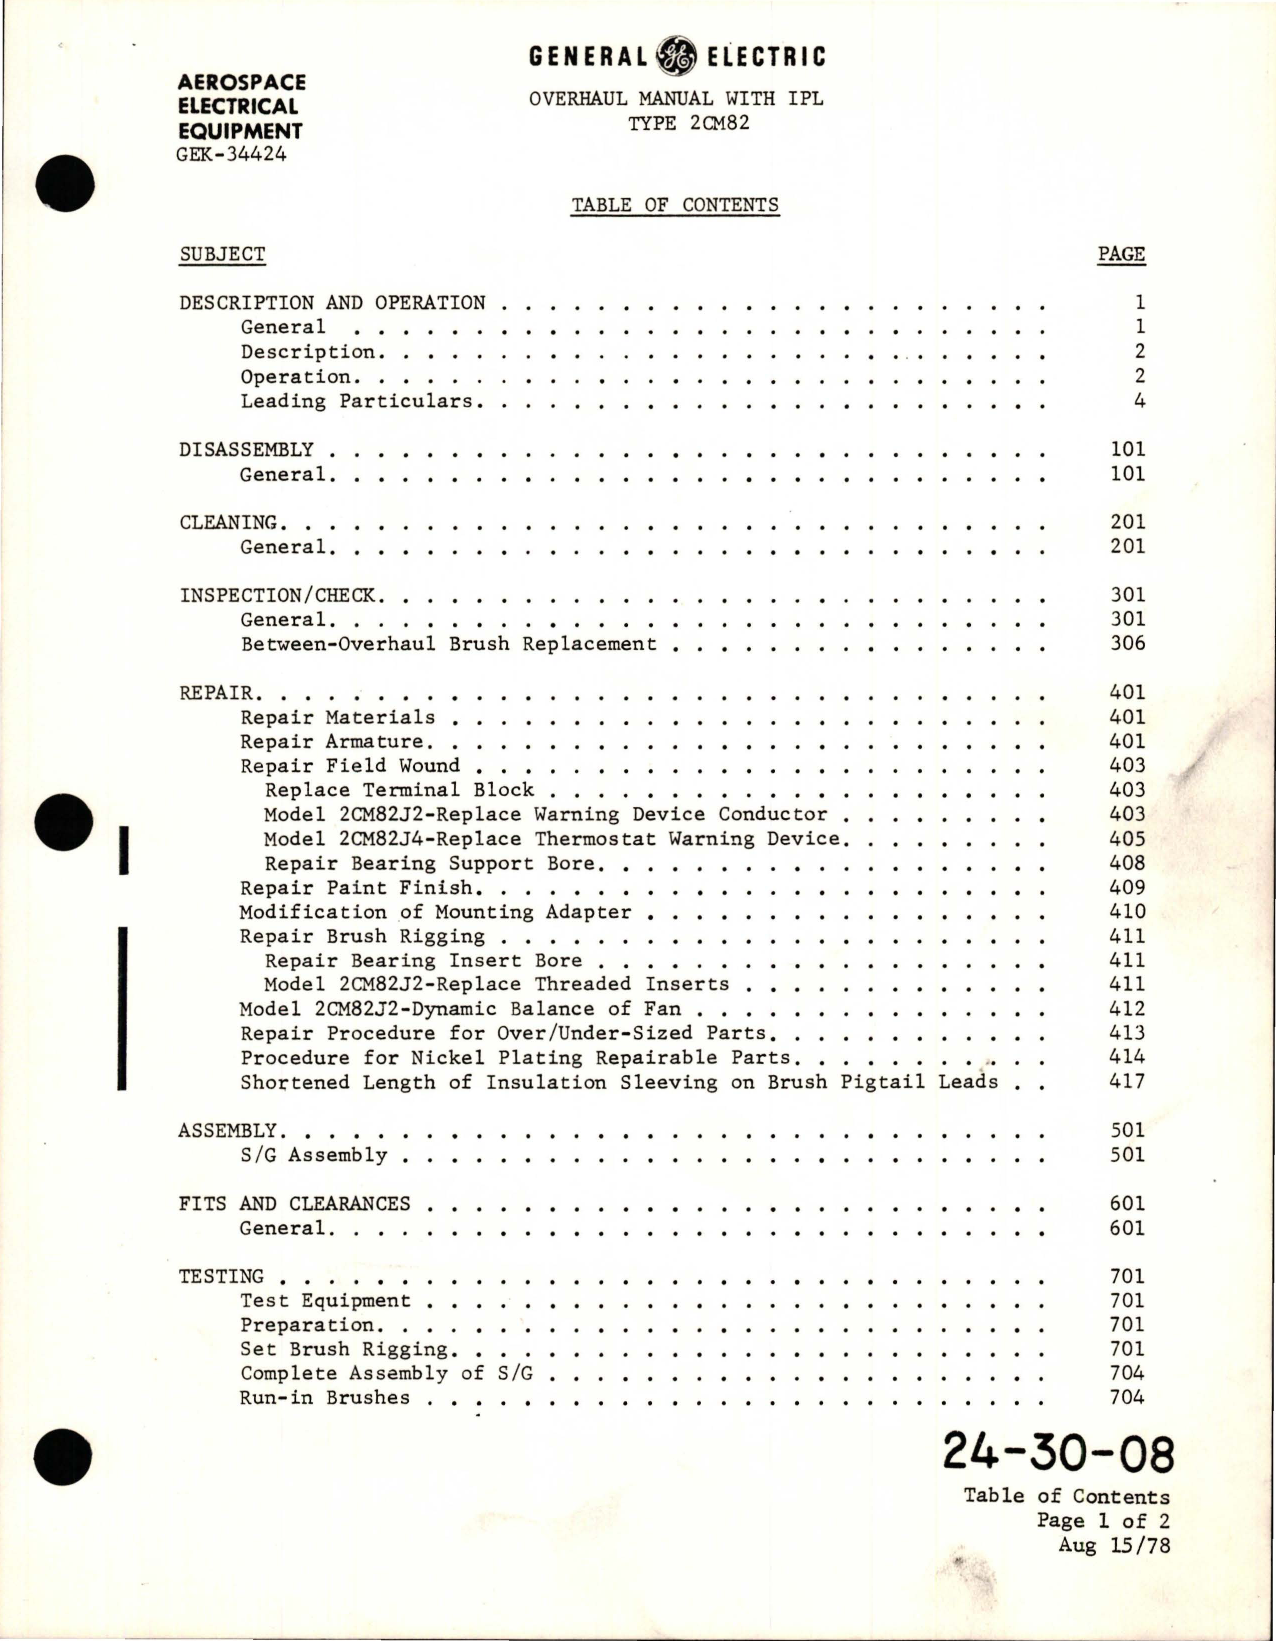 Sample page 9 from AirCorps Library document: Overhaul with Illustrated Parts List for DC Starter Generator - Models 2CM82J1, 2CM82J1B, 2CM82J2, and 2CM82J4 - Revision 3